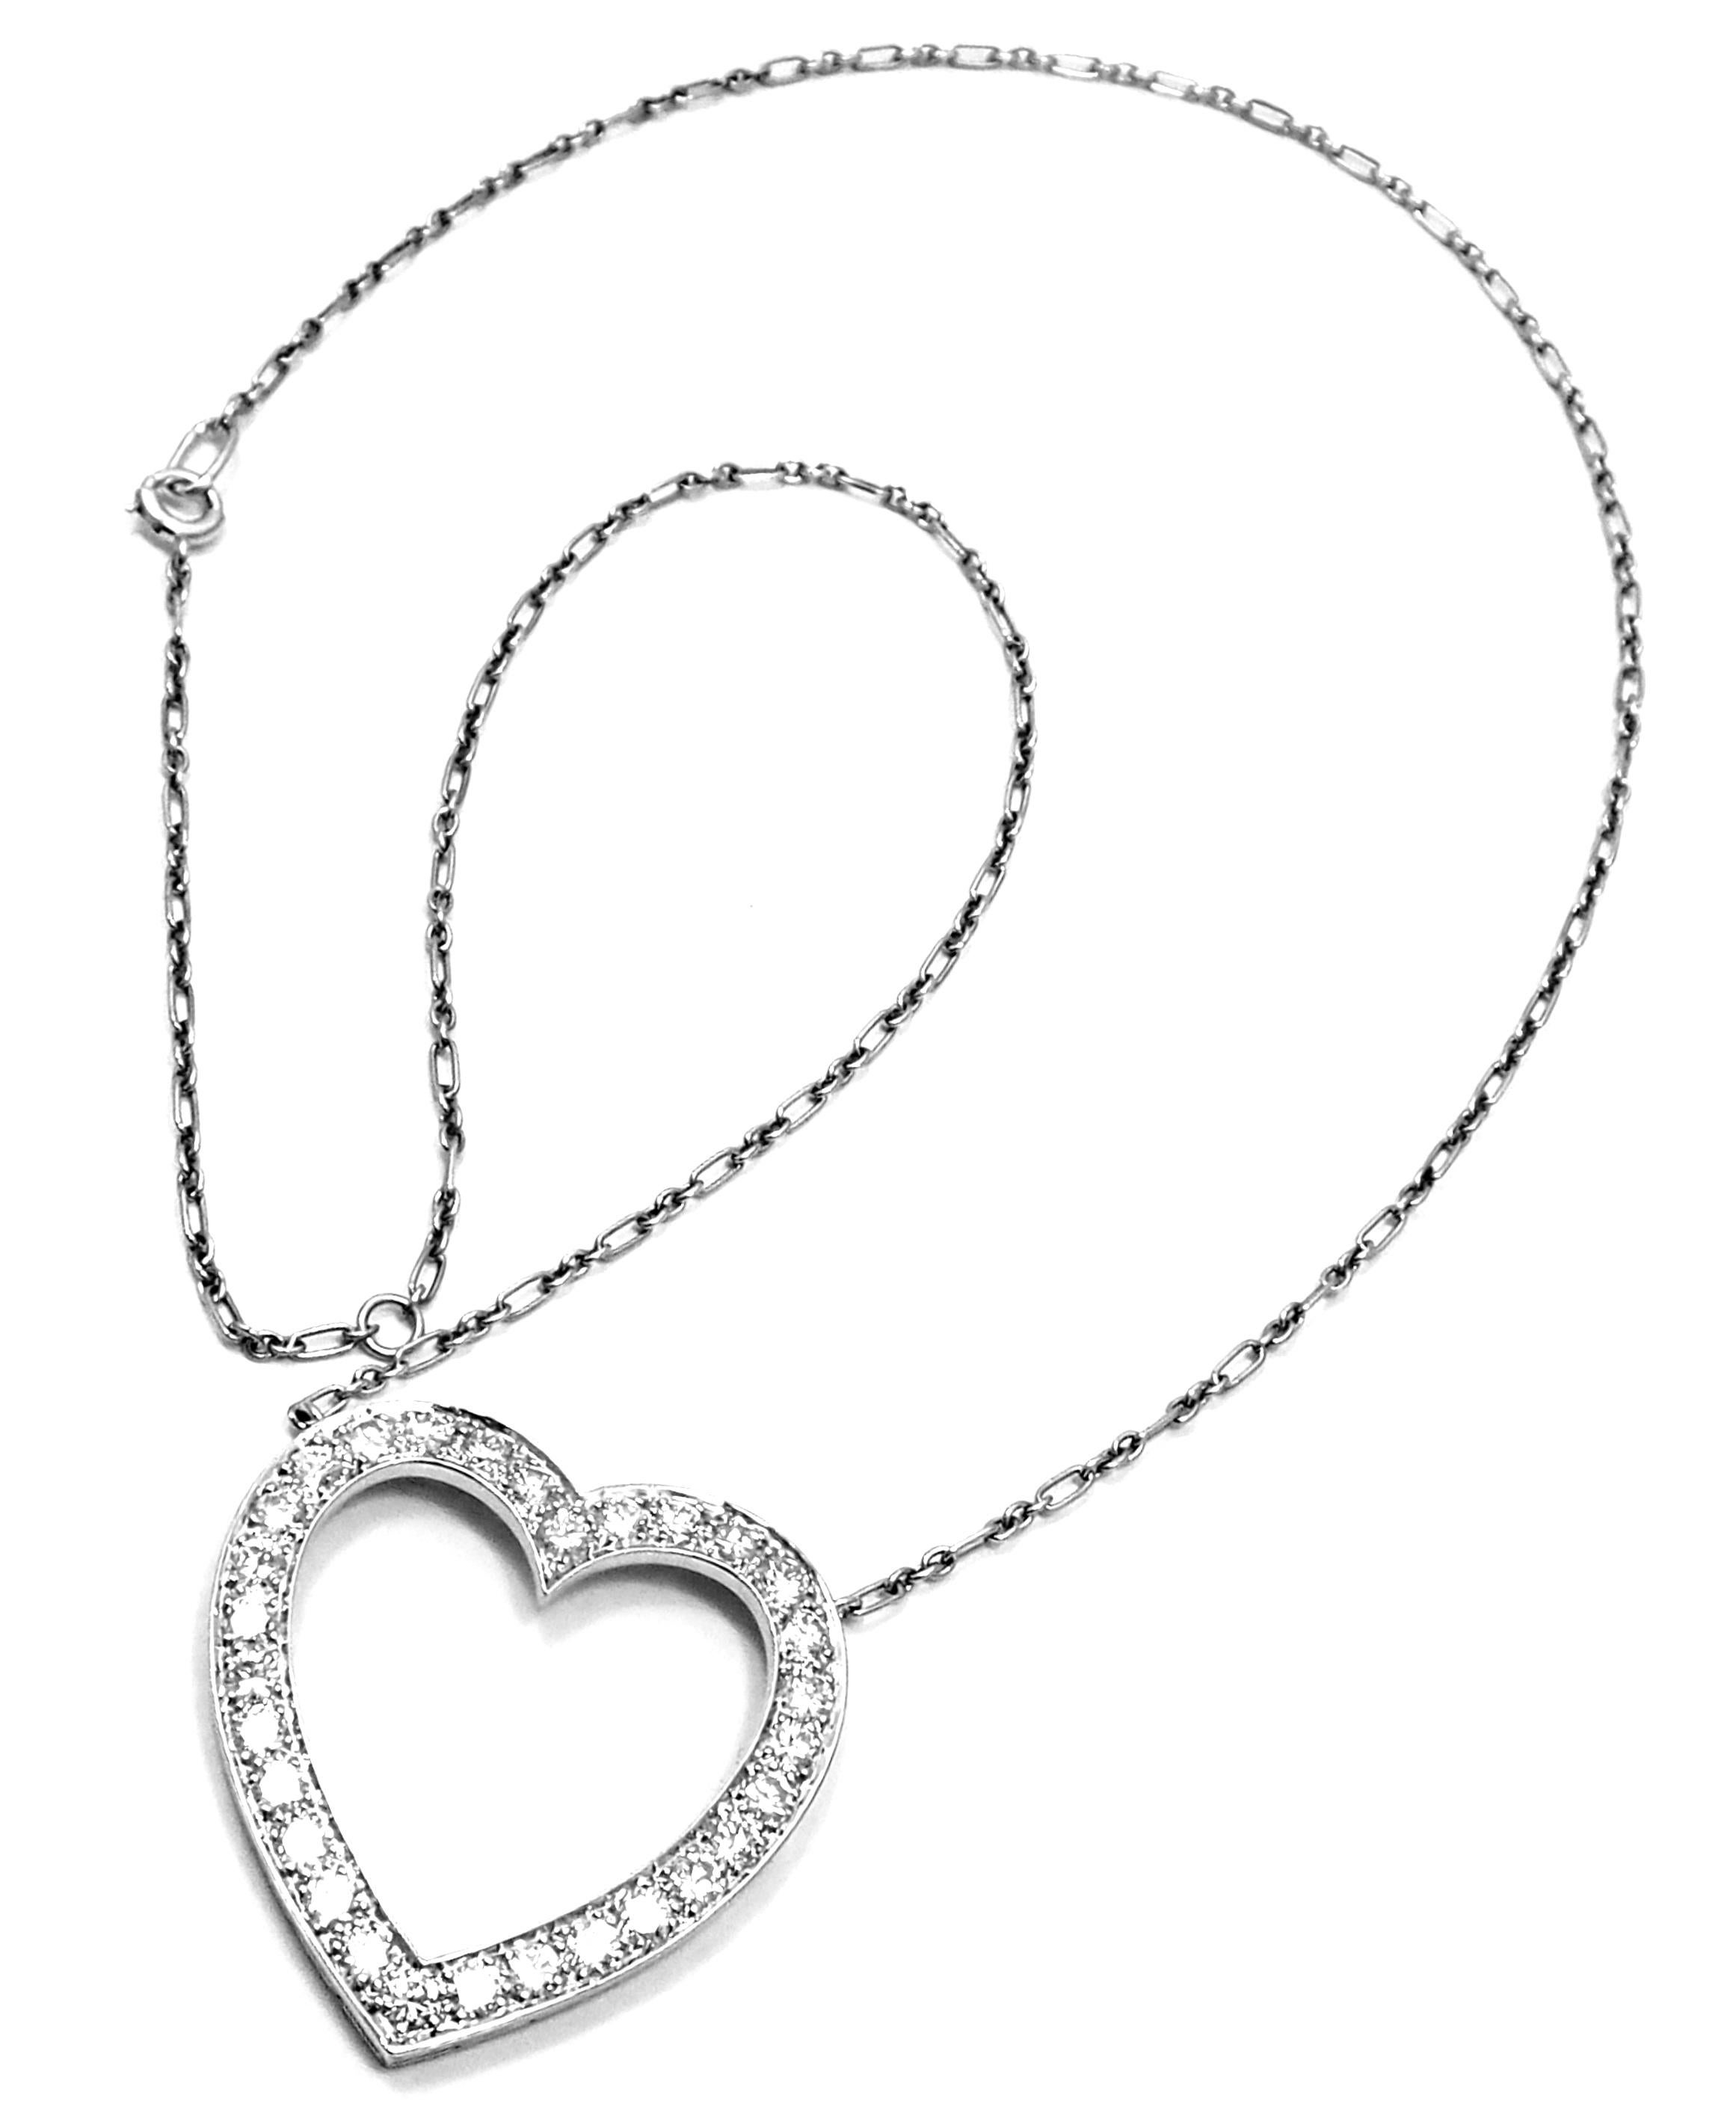 Palladium Diamond Large Heart Necklace by Tiffany & Co.
With 30 Round brilliant cut diamonds VS1 clarity, G color total weight approx. 3.5ct
Details:
Length: 19.5